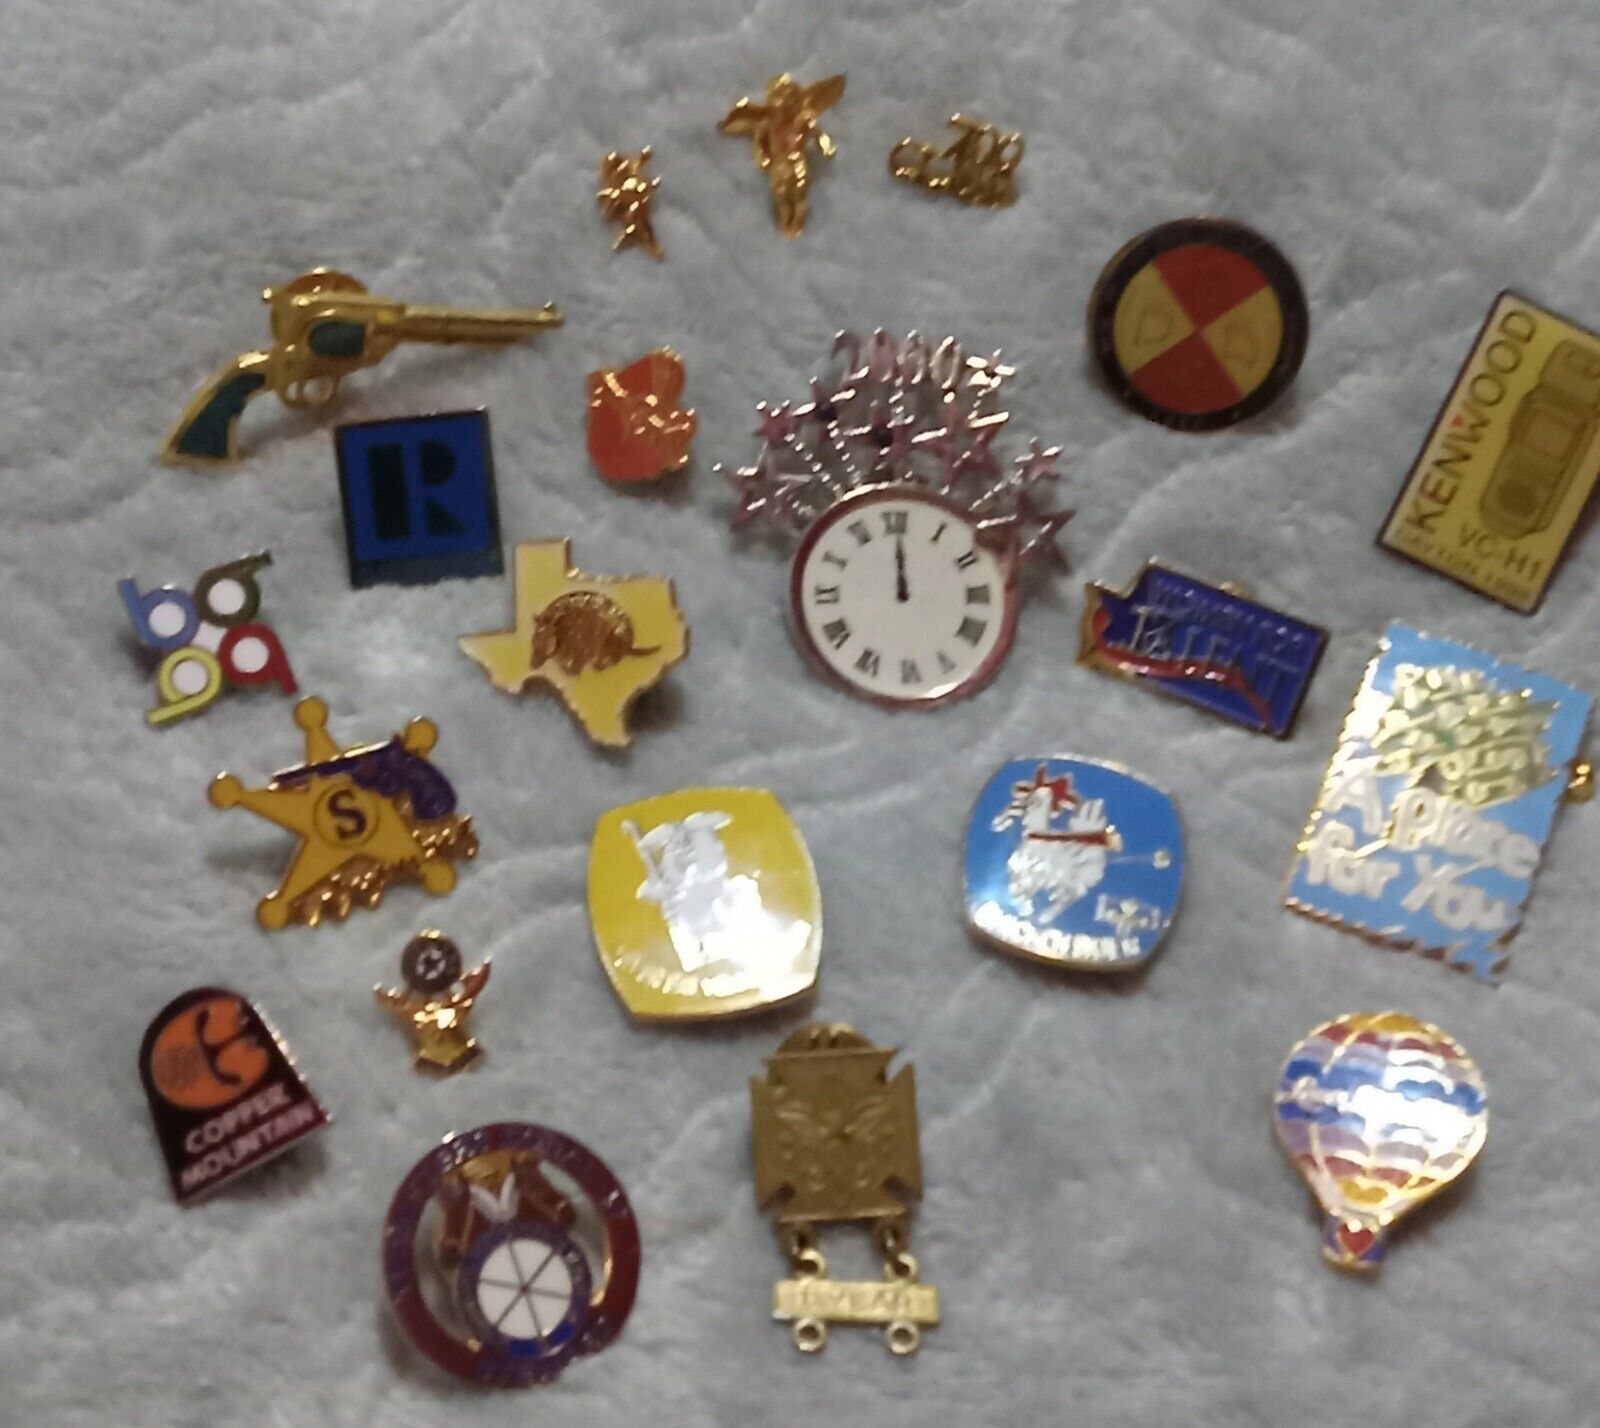 Lot of 21 Lapel Pins Teamsters ,States, Awards, Tourism,Estate Sale Find